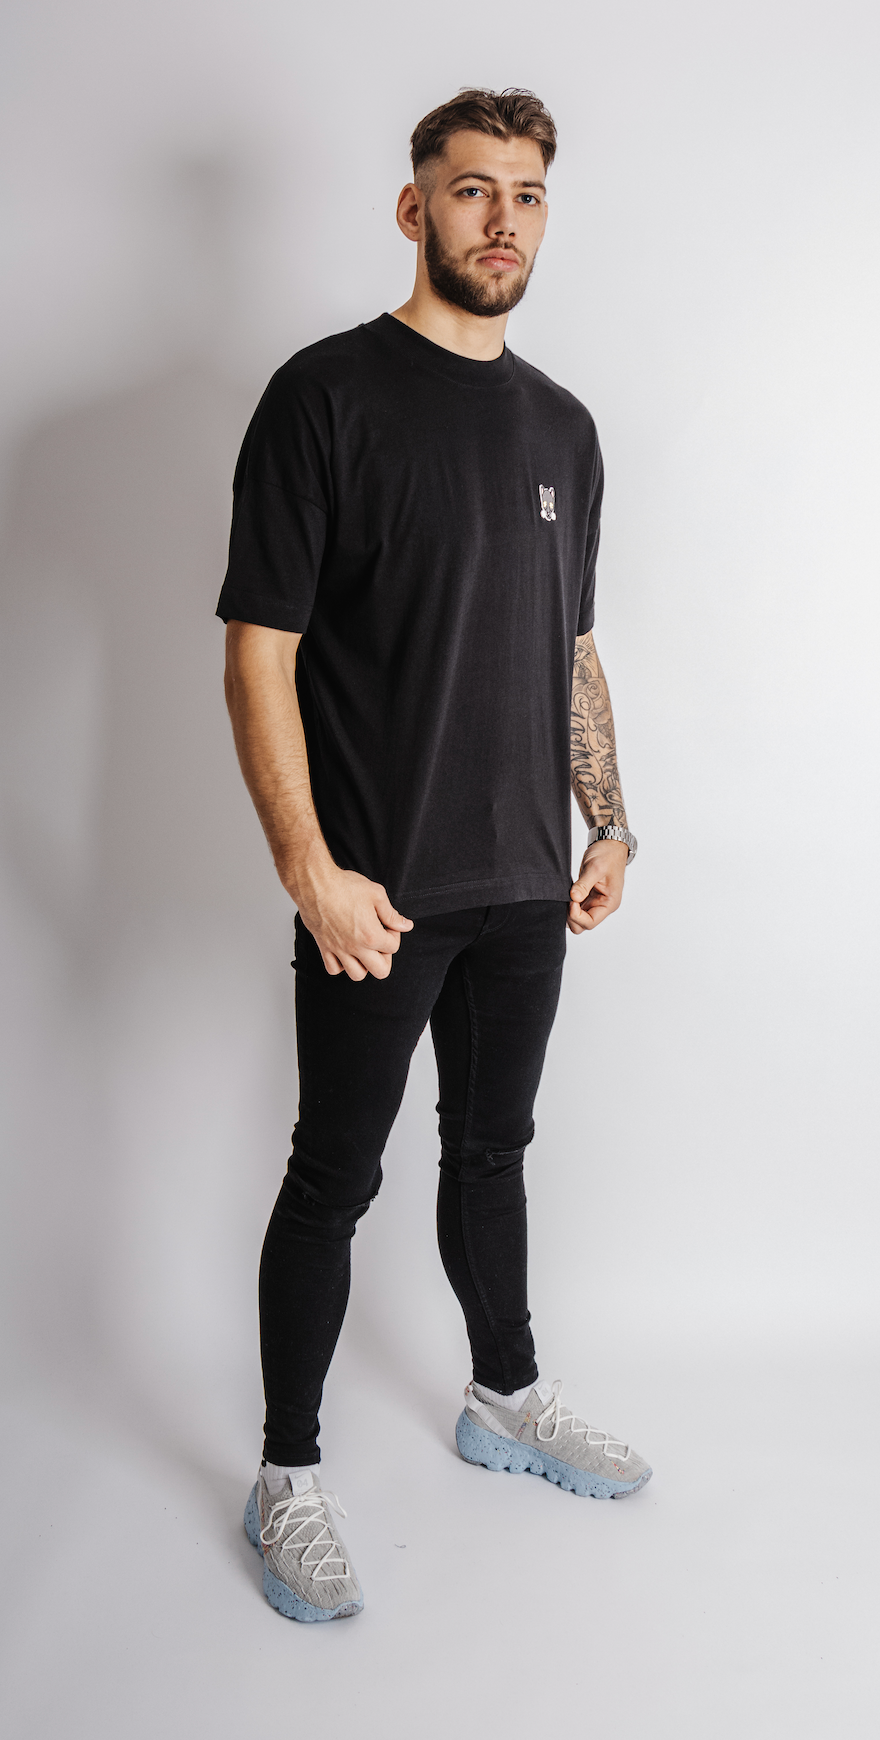 'good things' black t-shirt - oversized fit